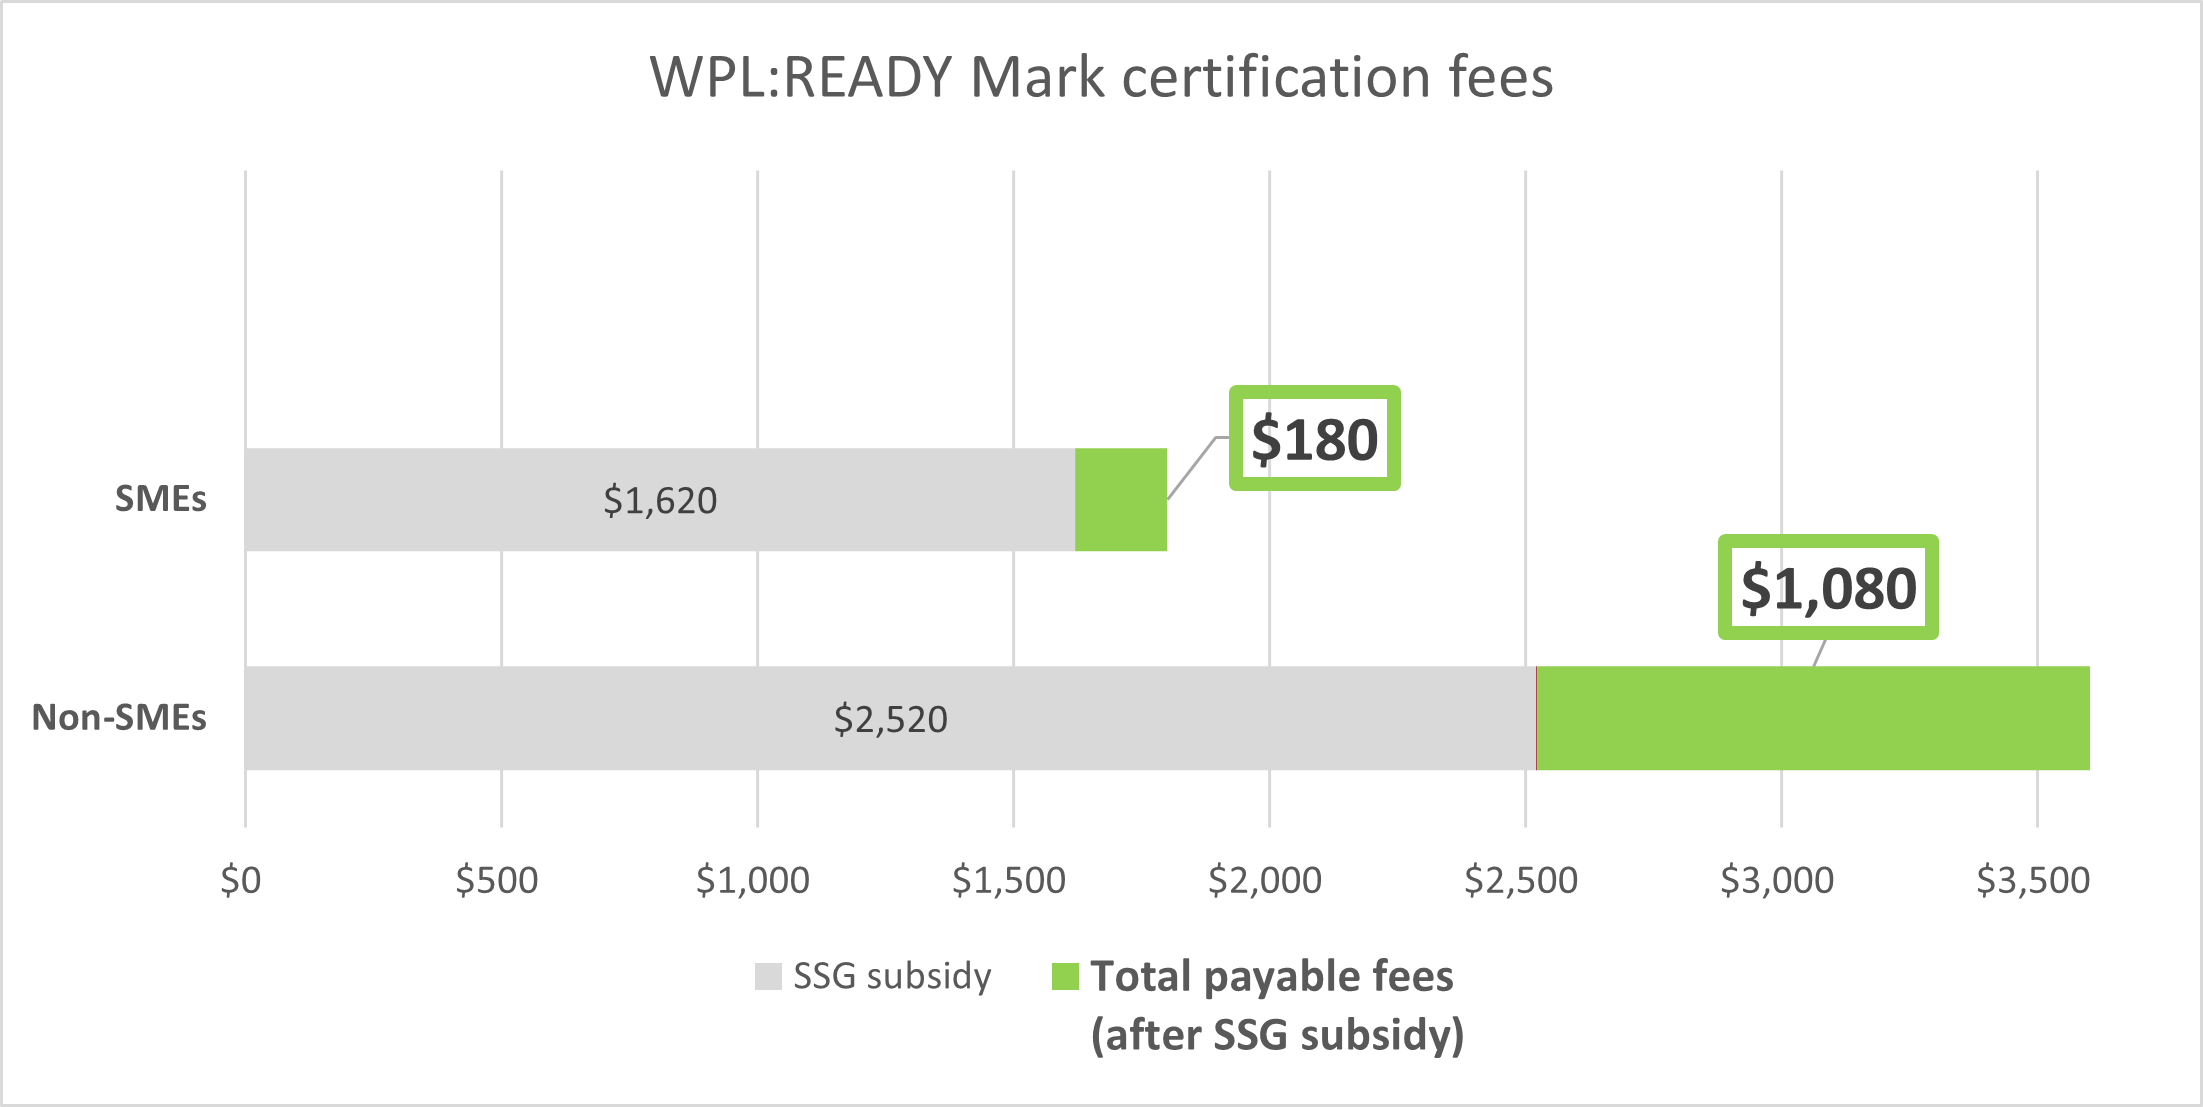 Workplace Learning Ready Mark certifcation fees